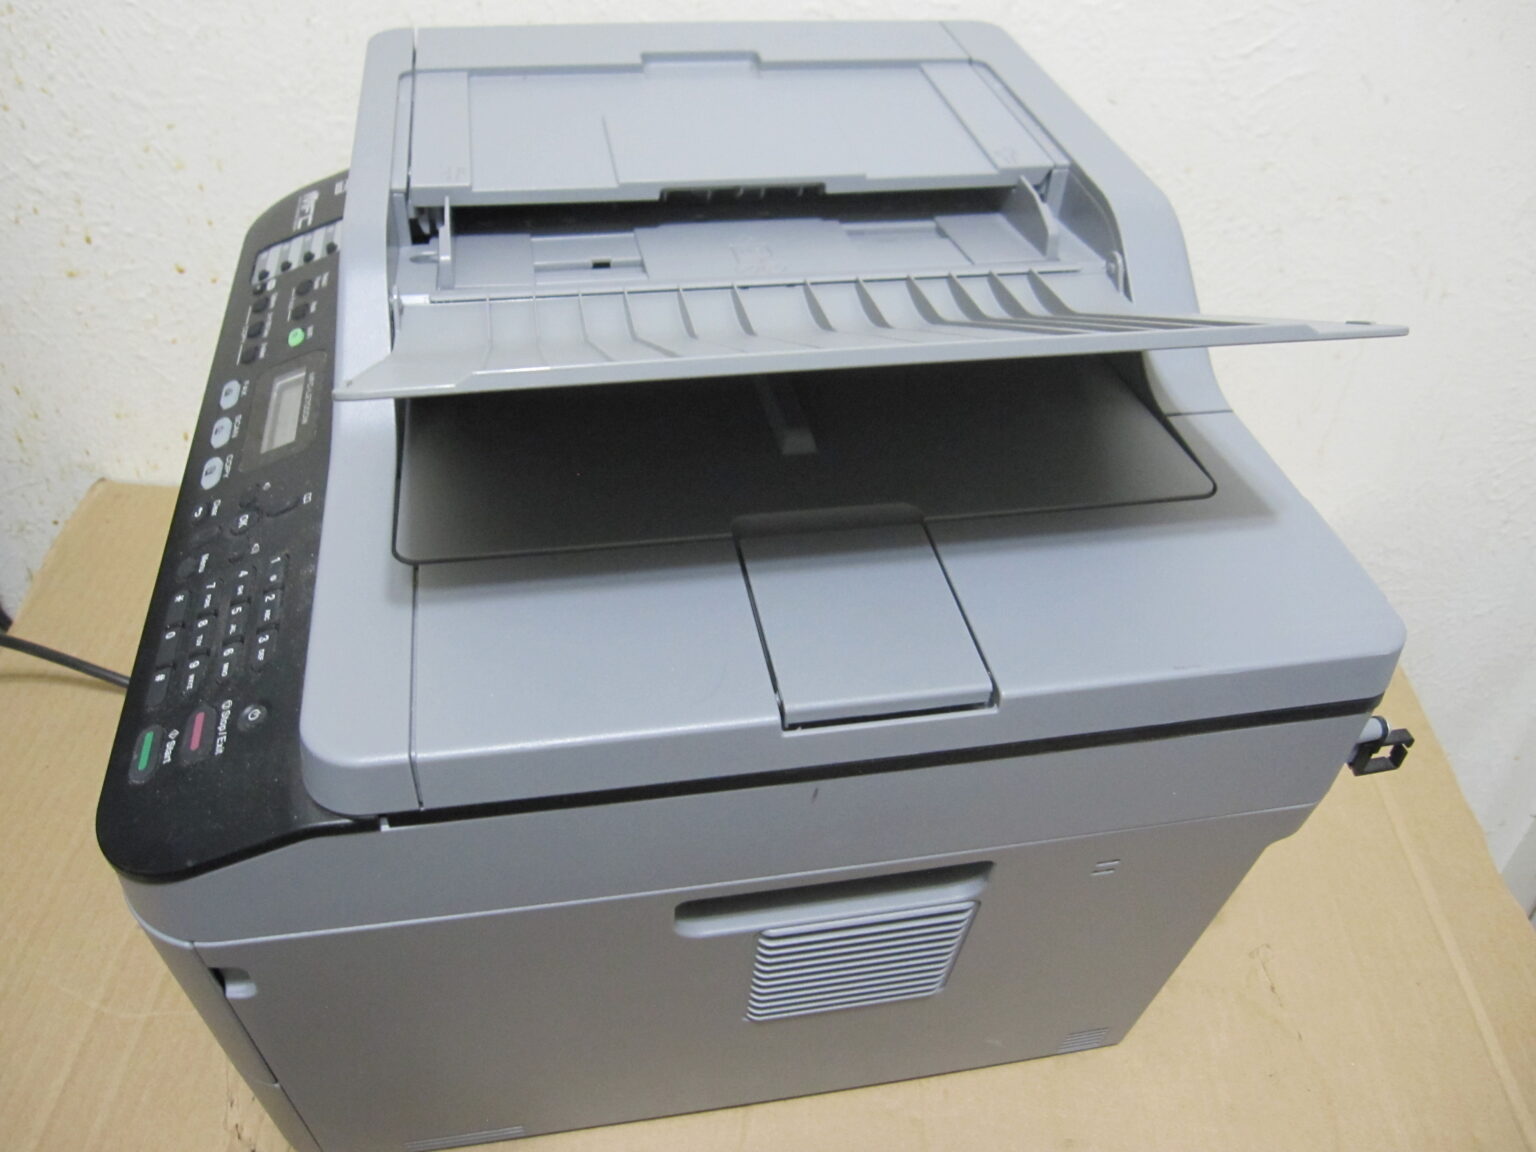 Brother Mfc L2700dw All In One Monochrome Laser Printer Imagine41 1770